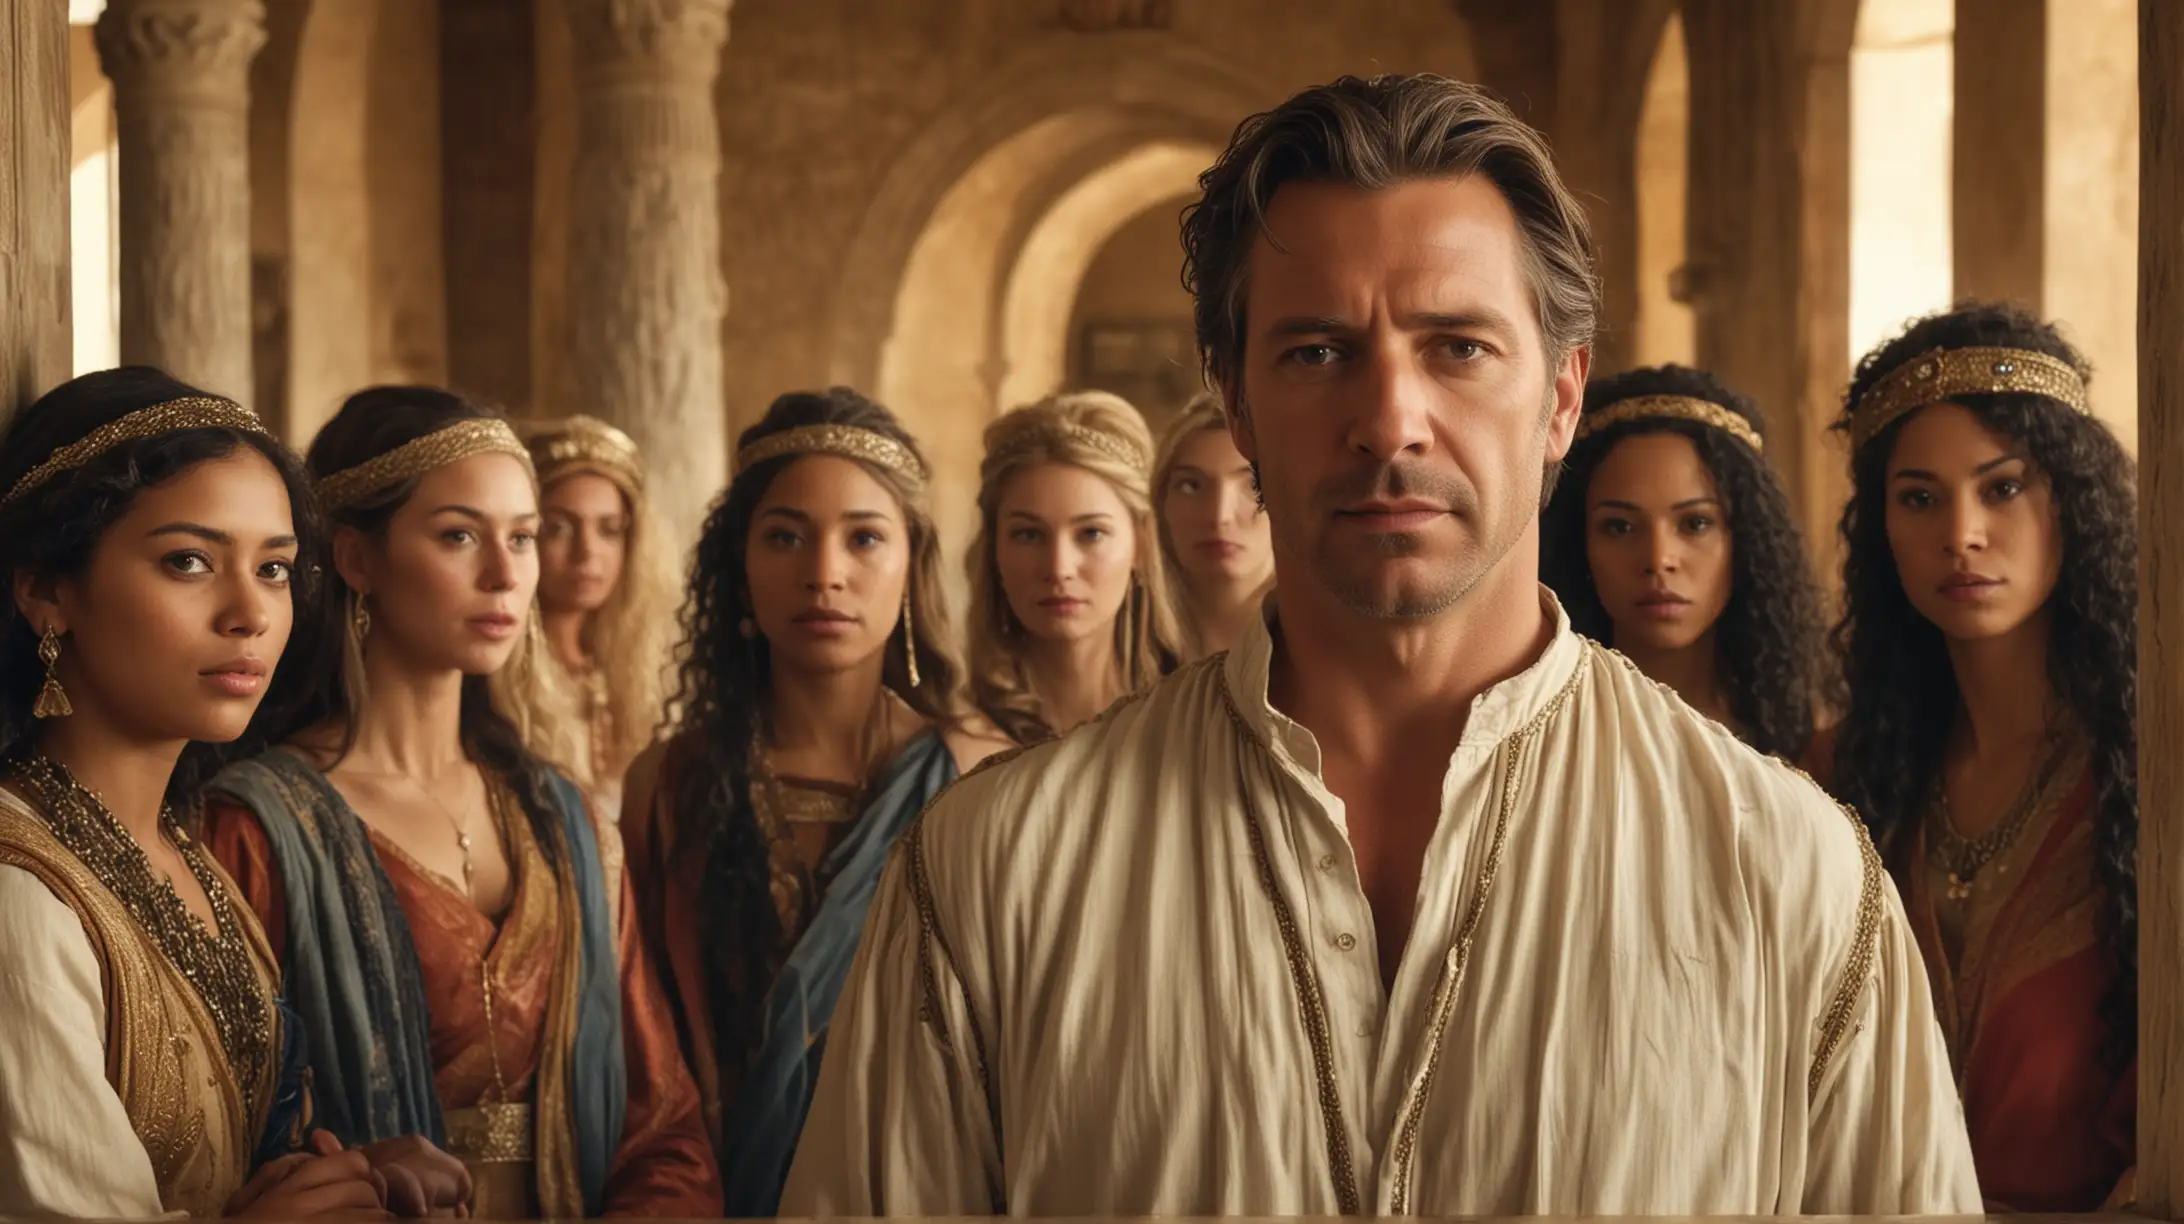 A middle aged handsome man in his palace with several different women around him from different races. Set during the biblical era of  Joshua.